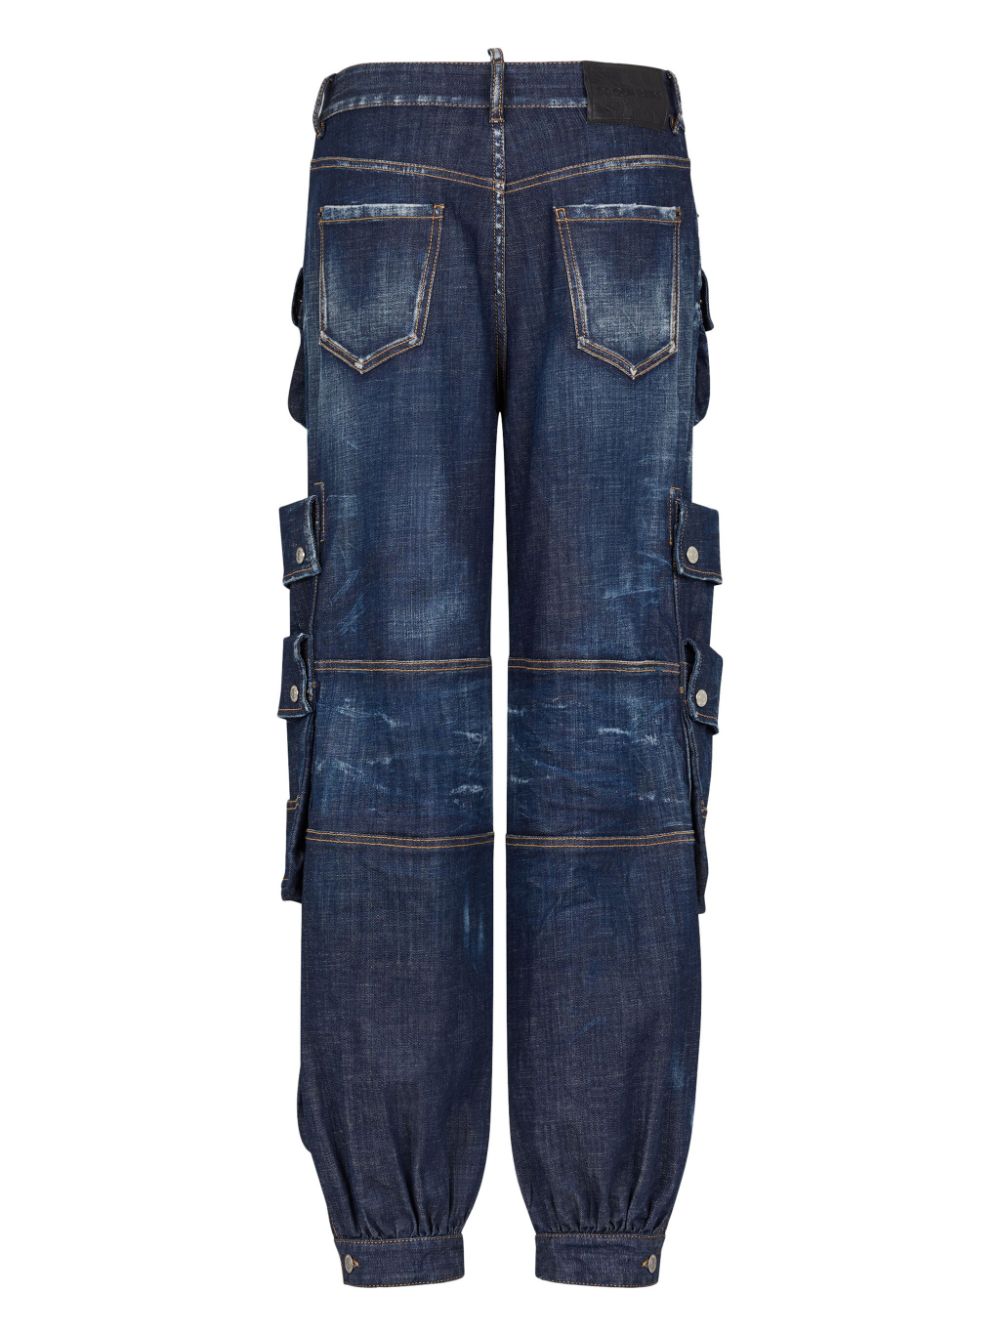 Jeans with cargo pockets